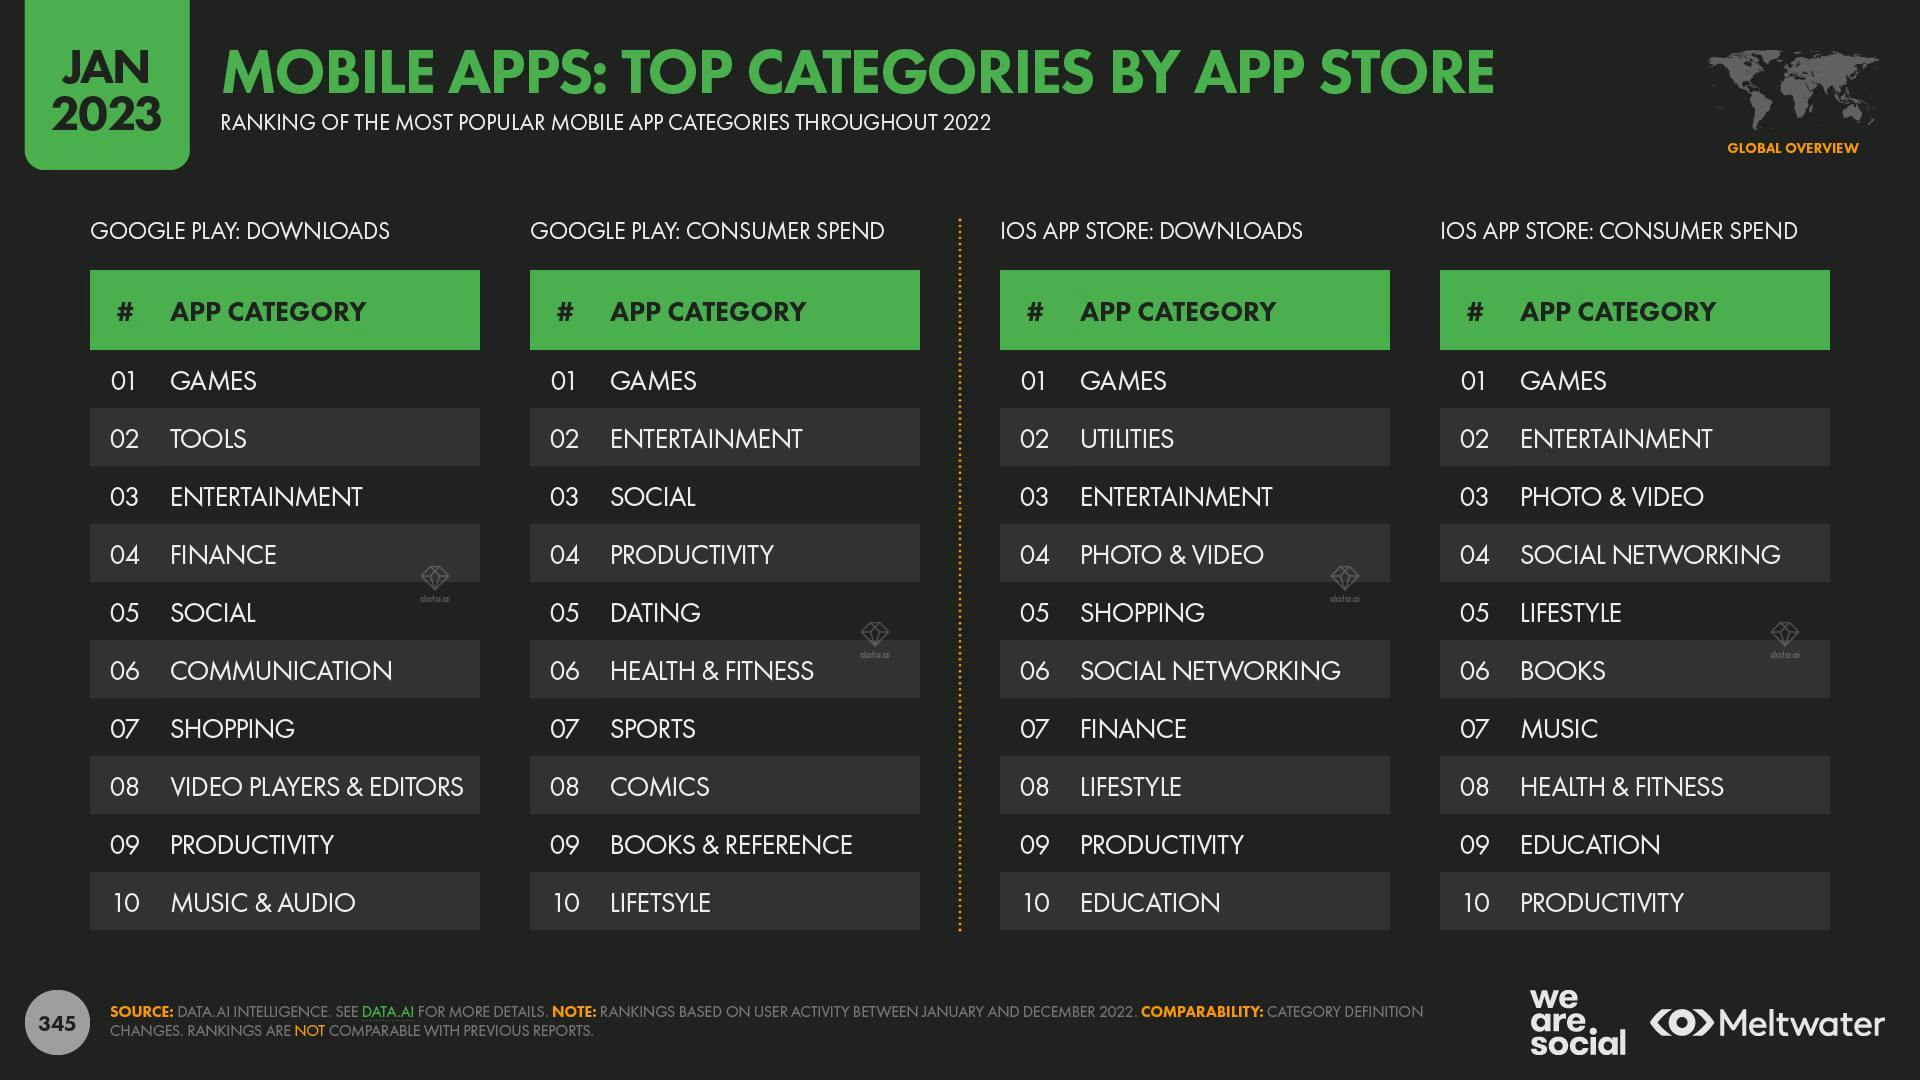 Mobile apps: top categories by app store 2023